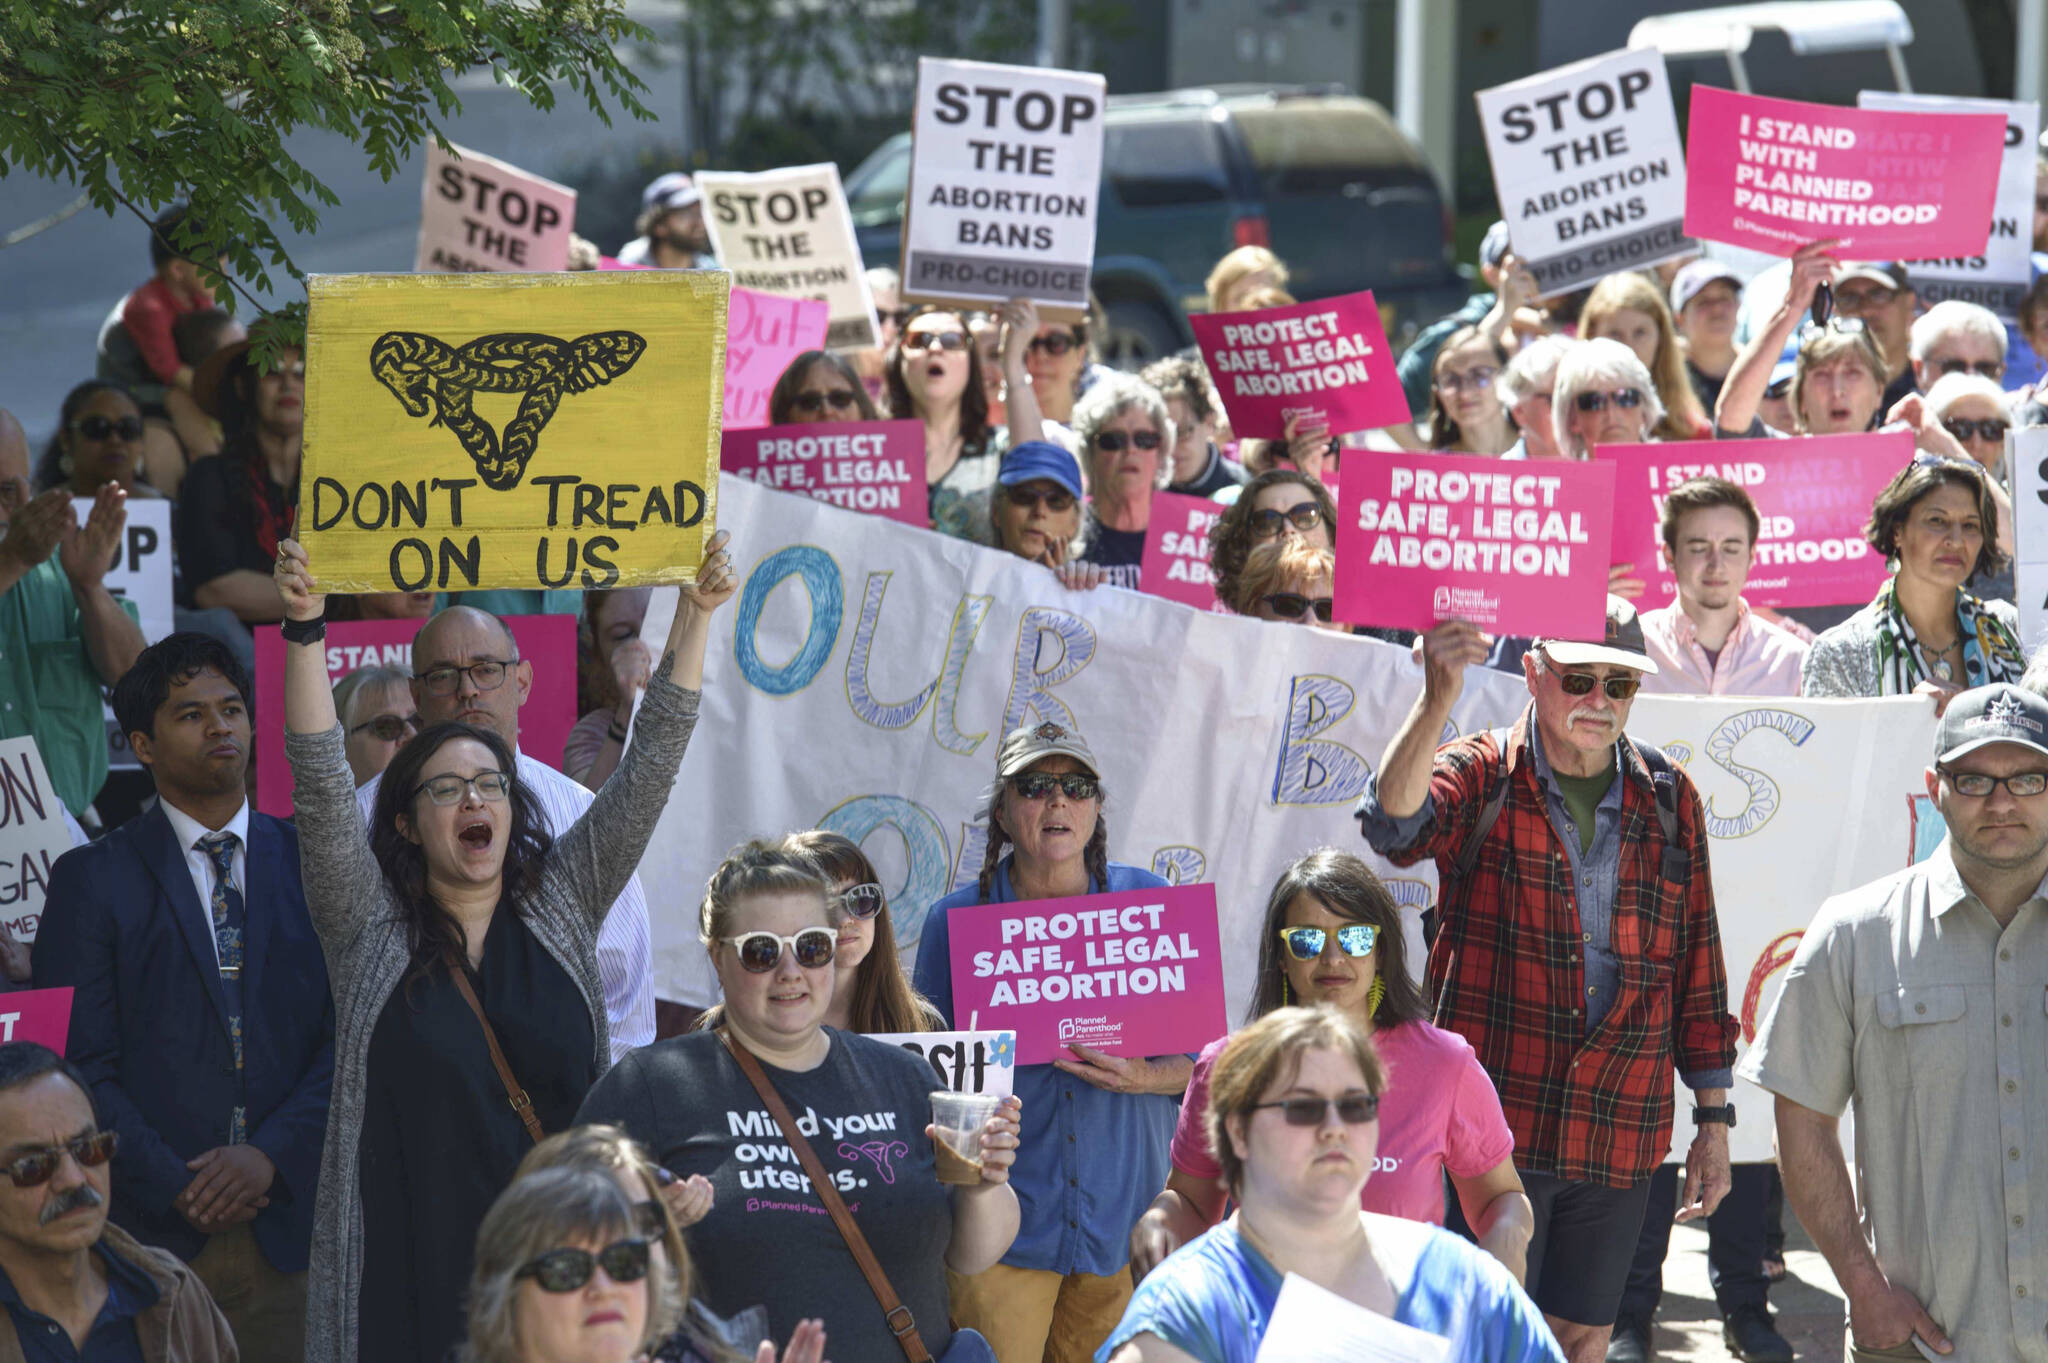 This May 21, 2019, photo shows people attending a rally against anti-abortion laws at the Dimond Courthouse Plaza in Juneau, Alaska. Alaska voters this year will be asked if they want a constitutional convention, and simmering anger over the legislature’s failure to settle the issue of how big a check residents should receive from the state’s oil wealth fund could provide a tail wind for groups seeking to change the constitution on a range of hot button topics, such as abortion. (Michael Penn/ Juneau Empire File)